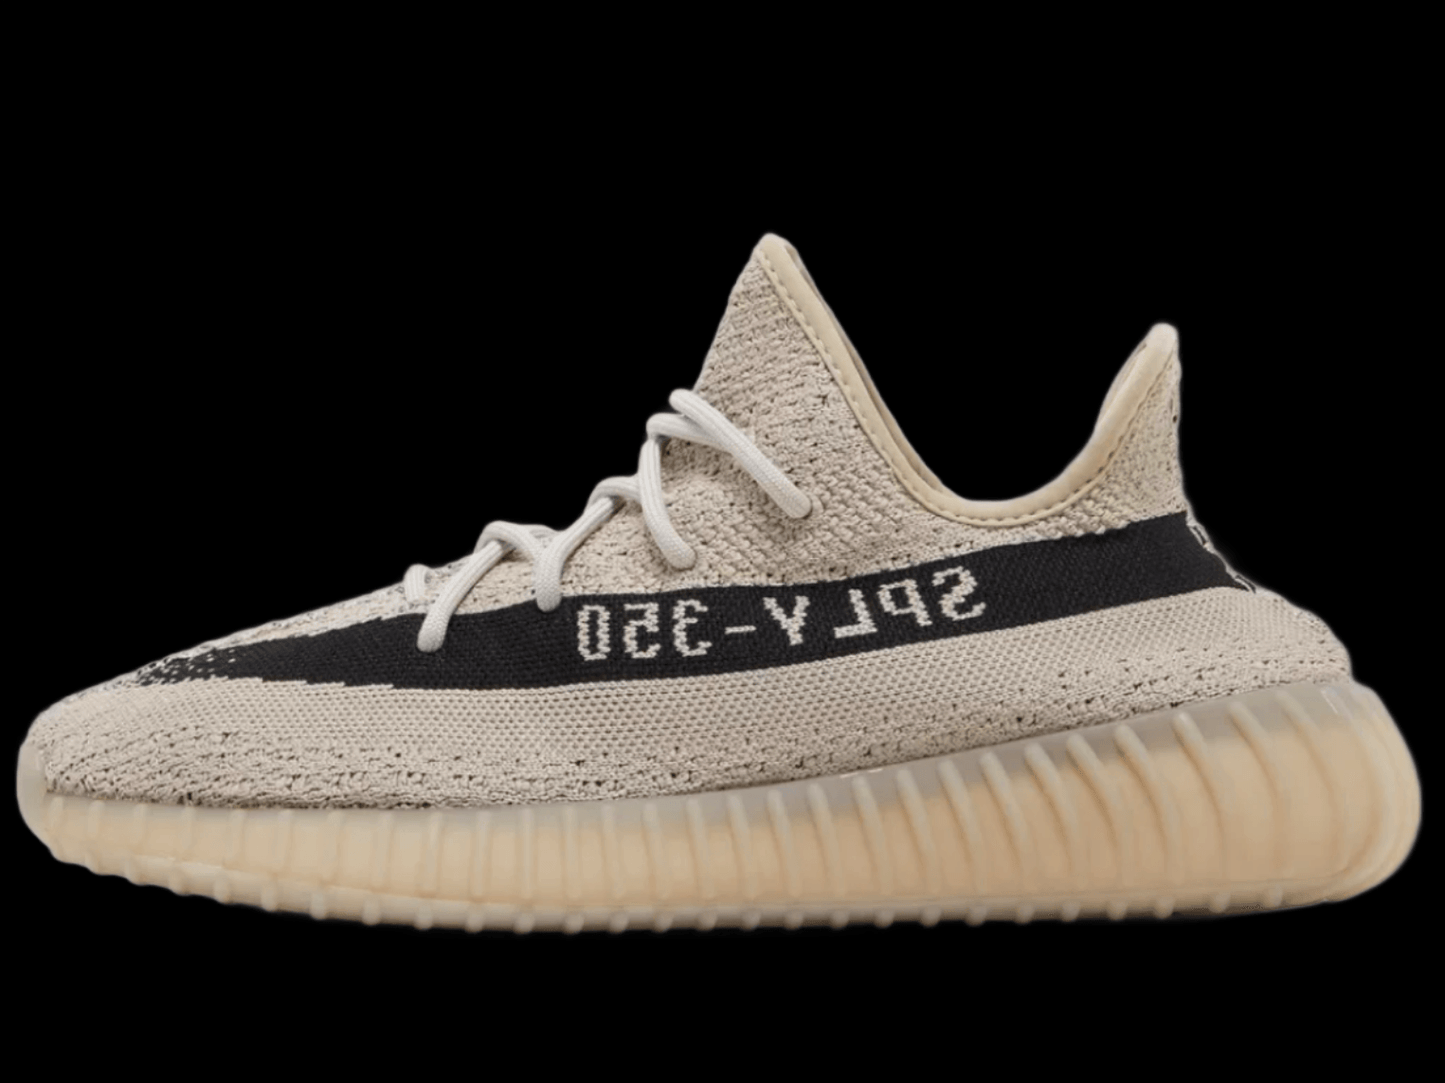 ADIDAS YEEZY BOOST 350 v2 'SLATE' - The Flaire